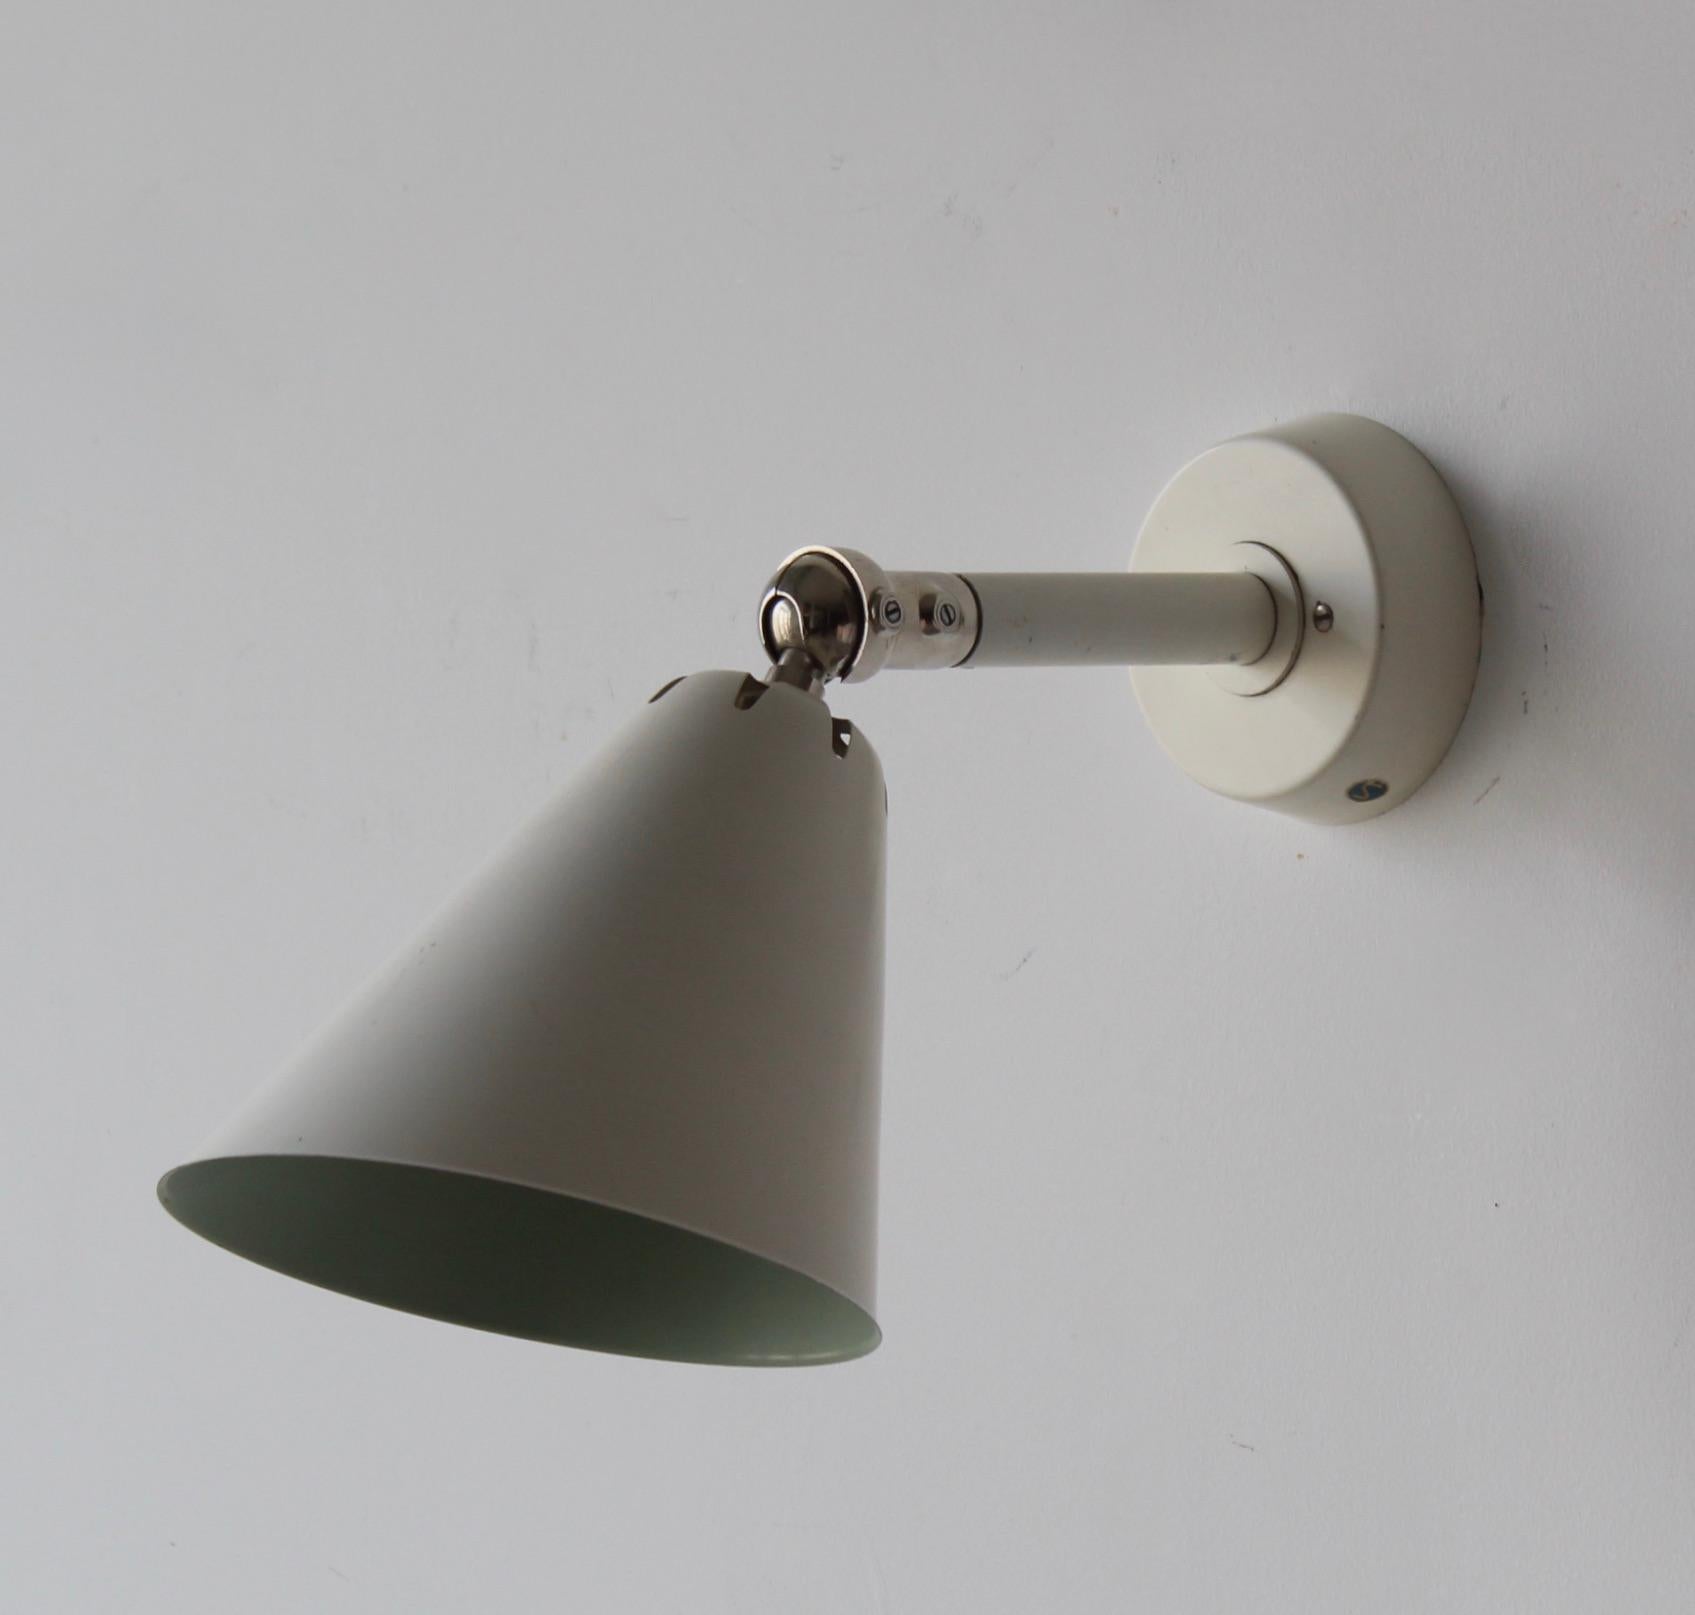 A pair of functionalist wall light. Produced by ASEA, 1950s. Features brass and white lacquered metal.

Configred for hardwire. 

Other designers of the period working in similar style include Hans Bergström, Paavo Tynell, Alvar Aalto, Serge